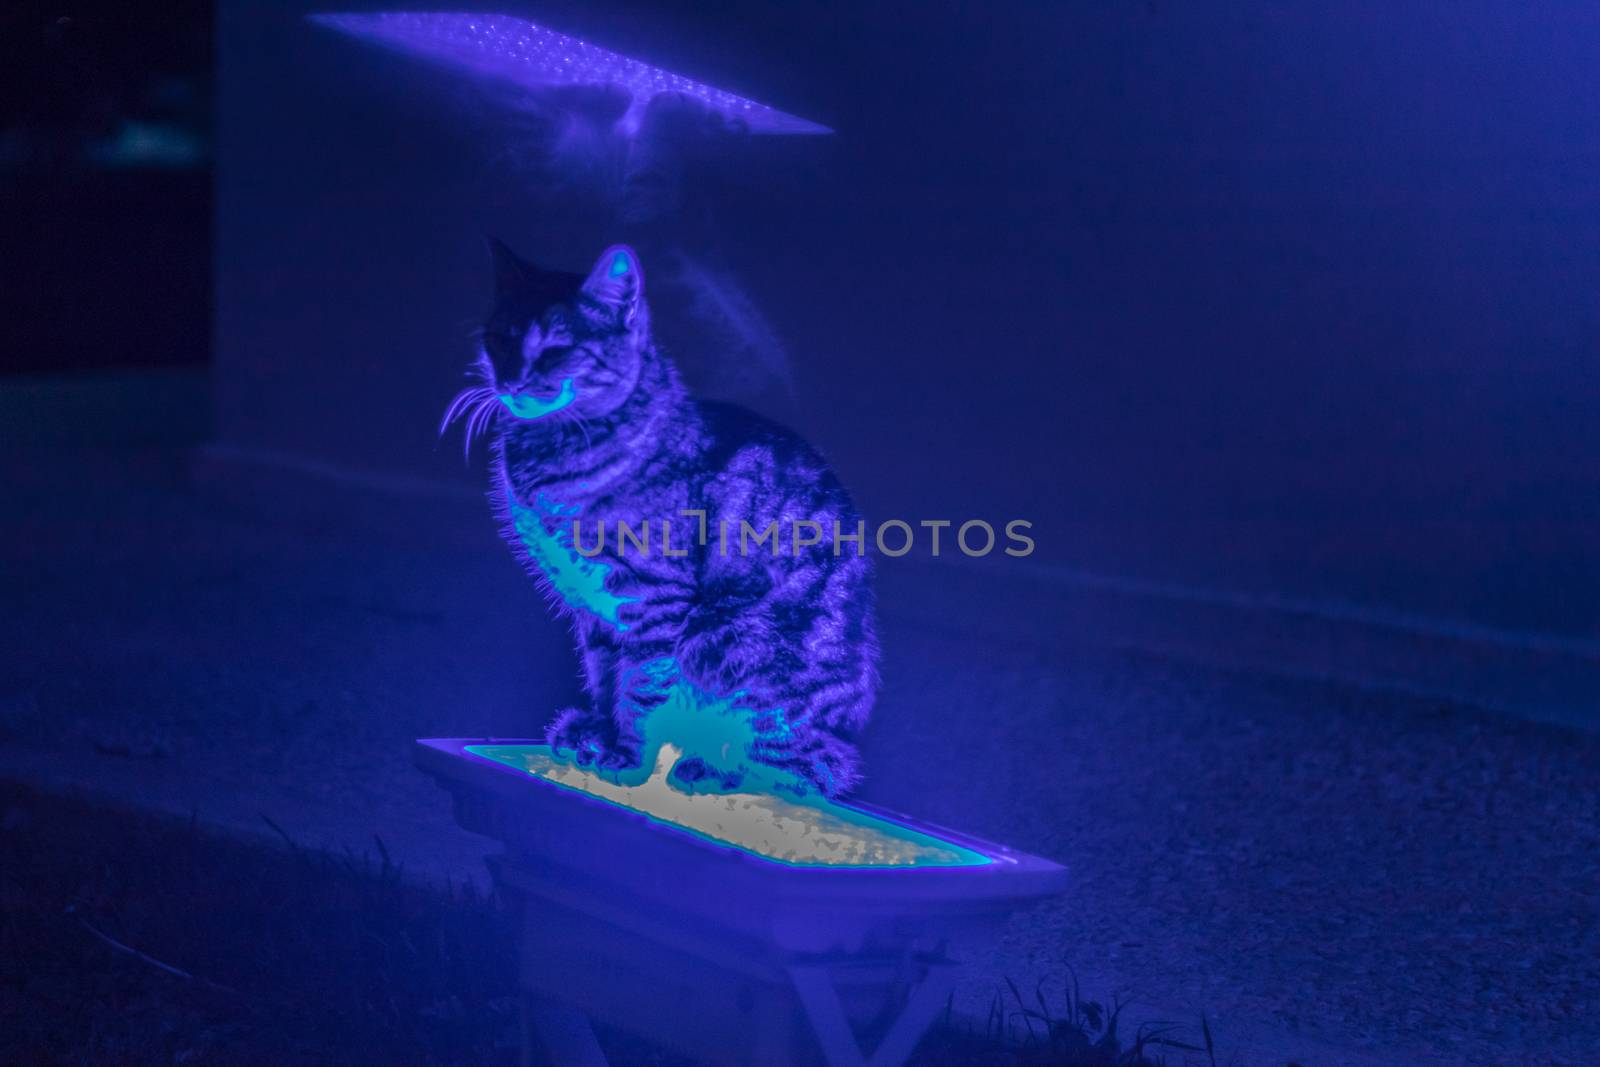 a cat sitting on blue neon light - highlights off by Swonie